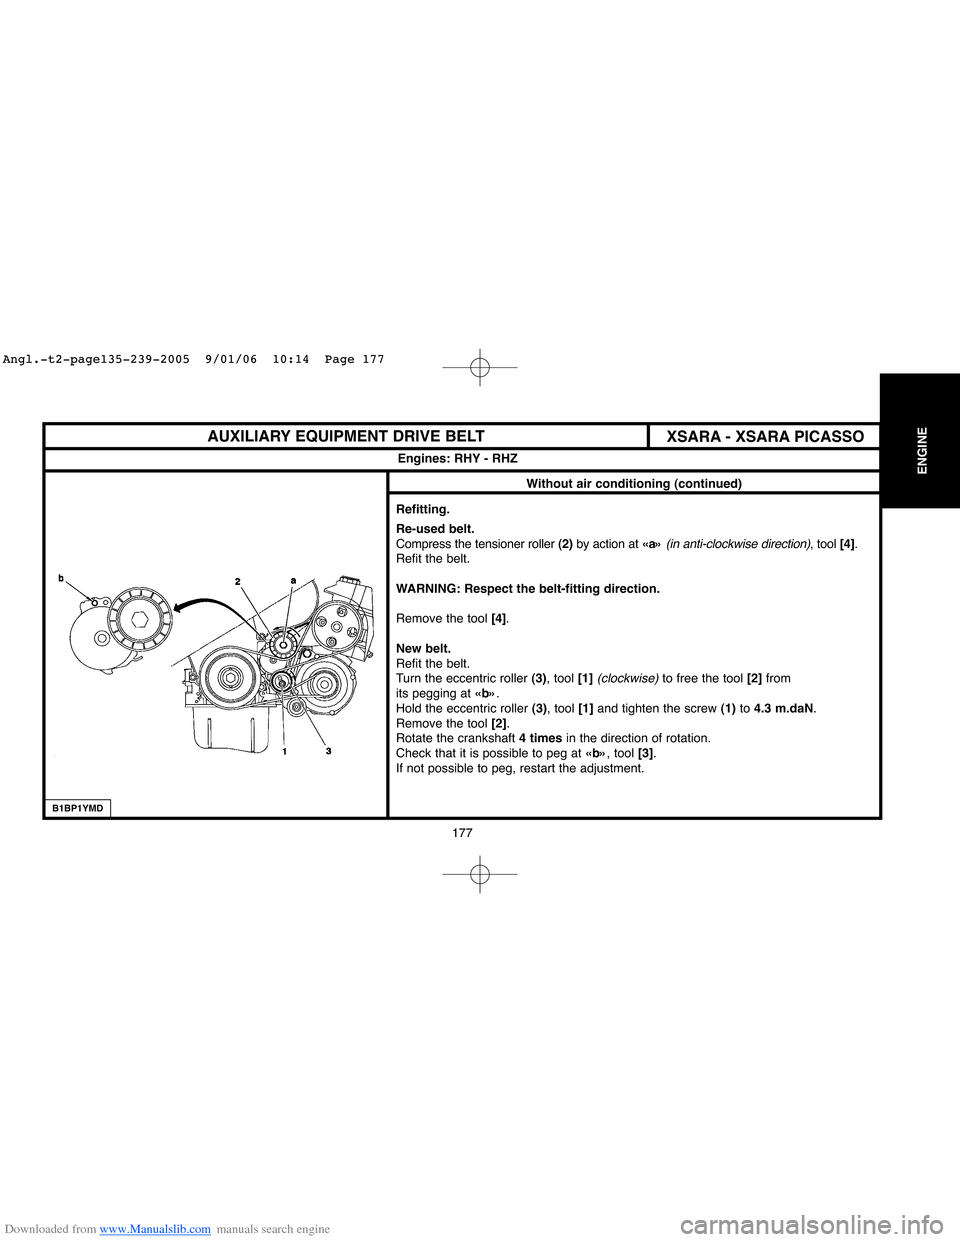 Citroen C4 2005 2.G Owners Manual Downloaded from www.Manualslib.com manuals search engine 177
ENGINE
XSARA - XSARA PICASSO AUXILIARY EQUIPMENT DRIVE BELT
Engines: RHY - RHZ
Without air conditioning (continued)
Refitting.
Re-used belt